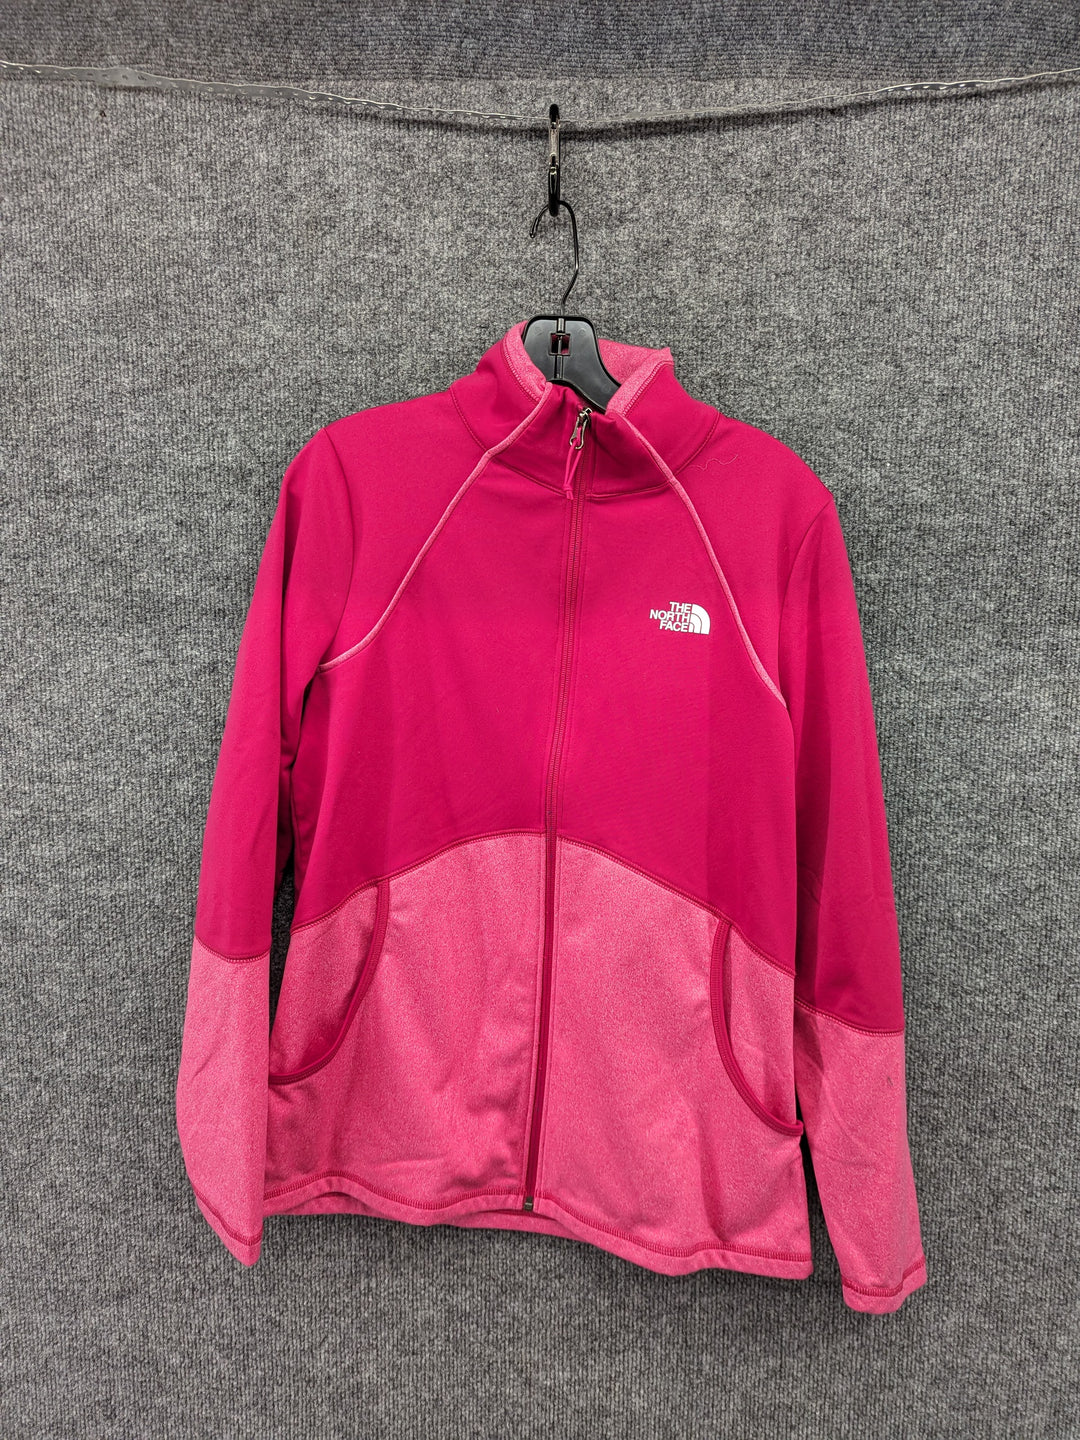 The North Face Size W Large Women's Synthetic Jacket